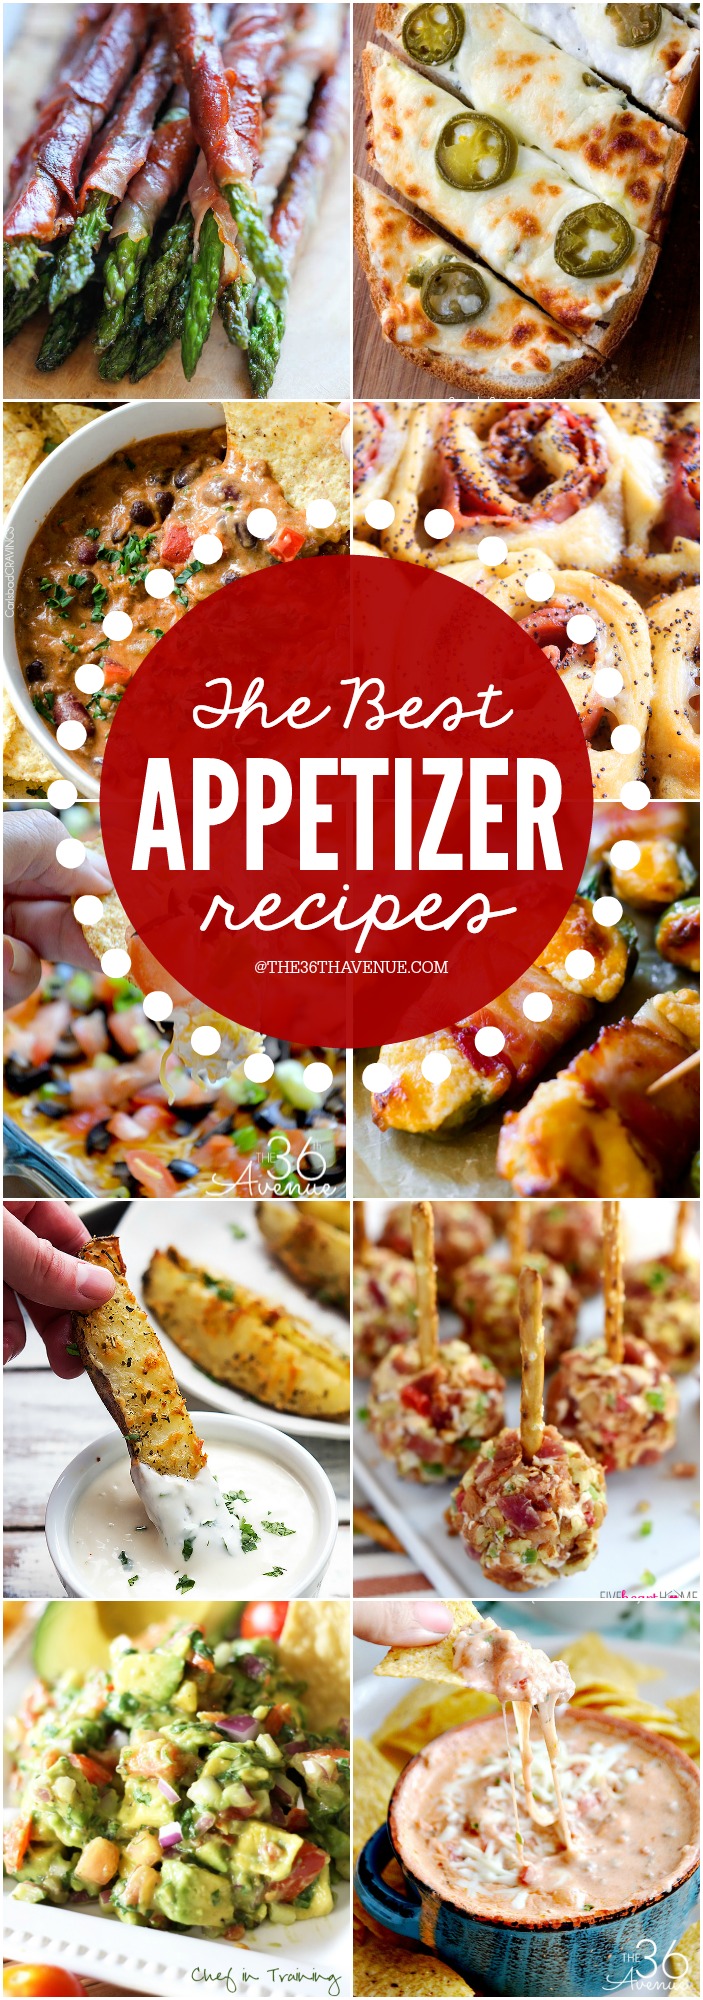 Appetizer Recipes by the36thavenue.com